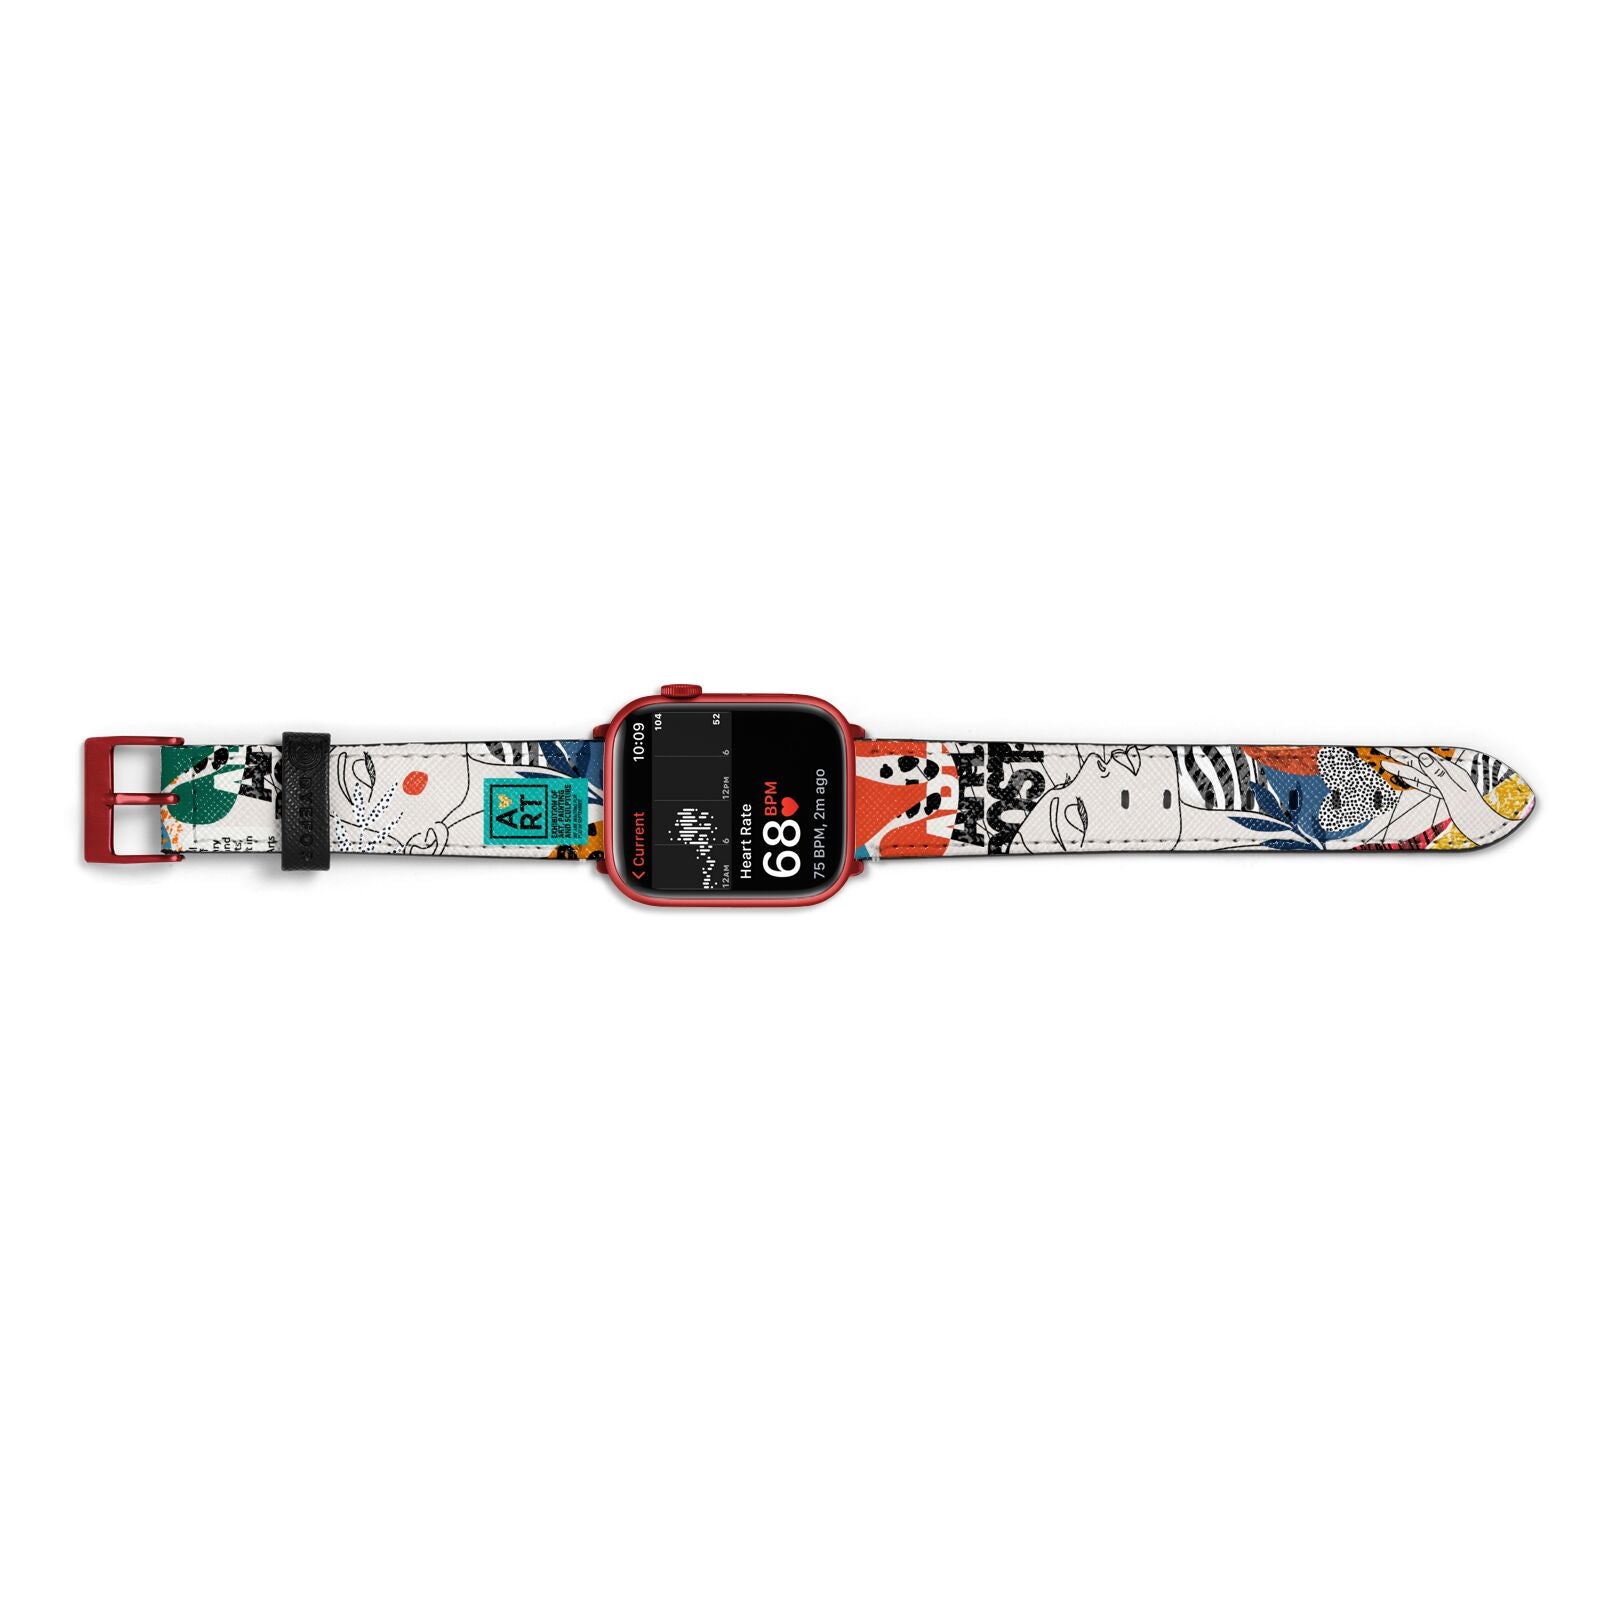 Abstract Art Poster Apple Watch Strap Size 38mm Landscape Image Red Hardware